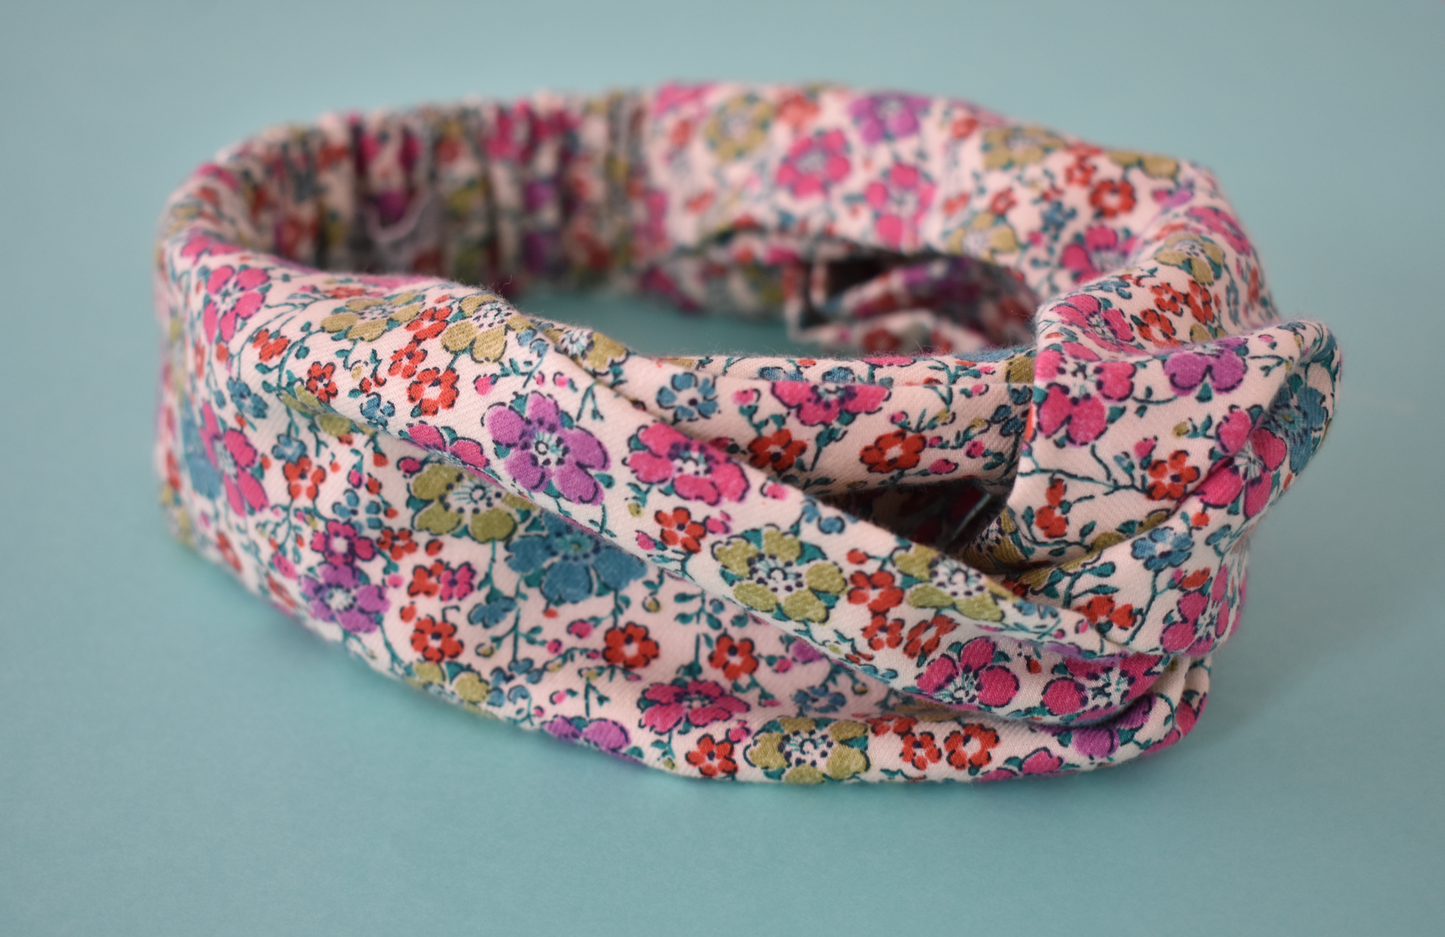 Kids Tot Knot Twisted hairband - Pretty Bright Floral Liberty of London print - Tot Knots of Brighton